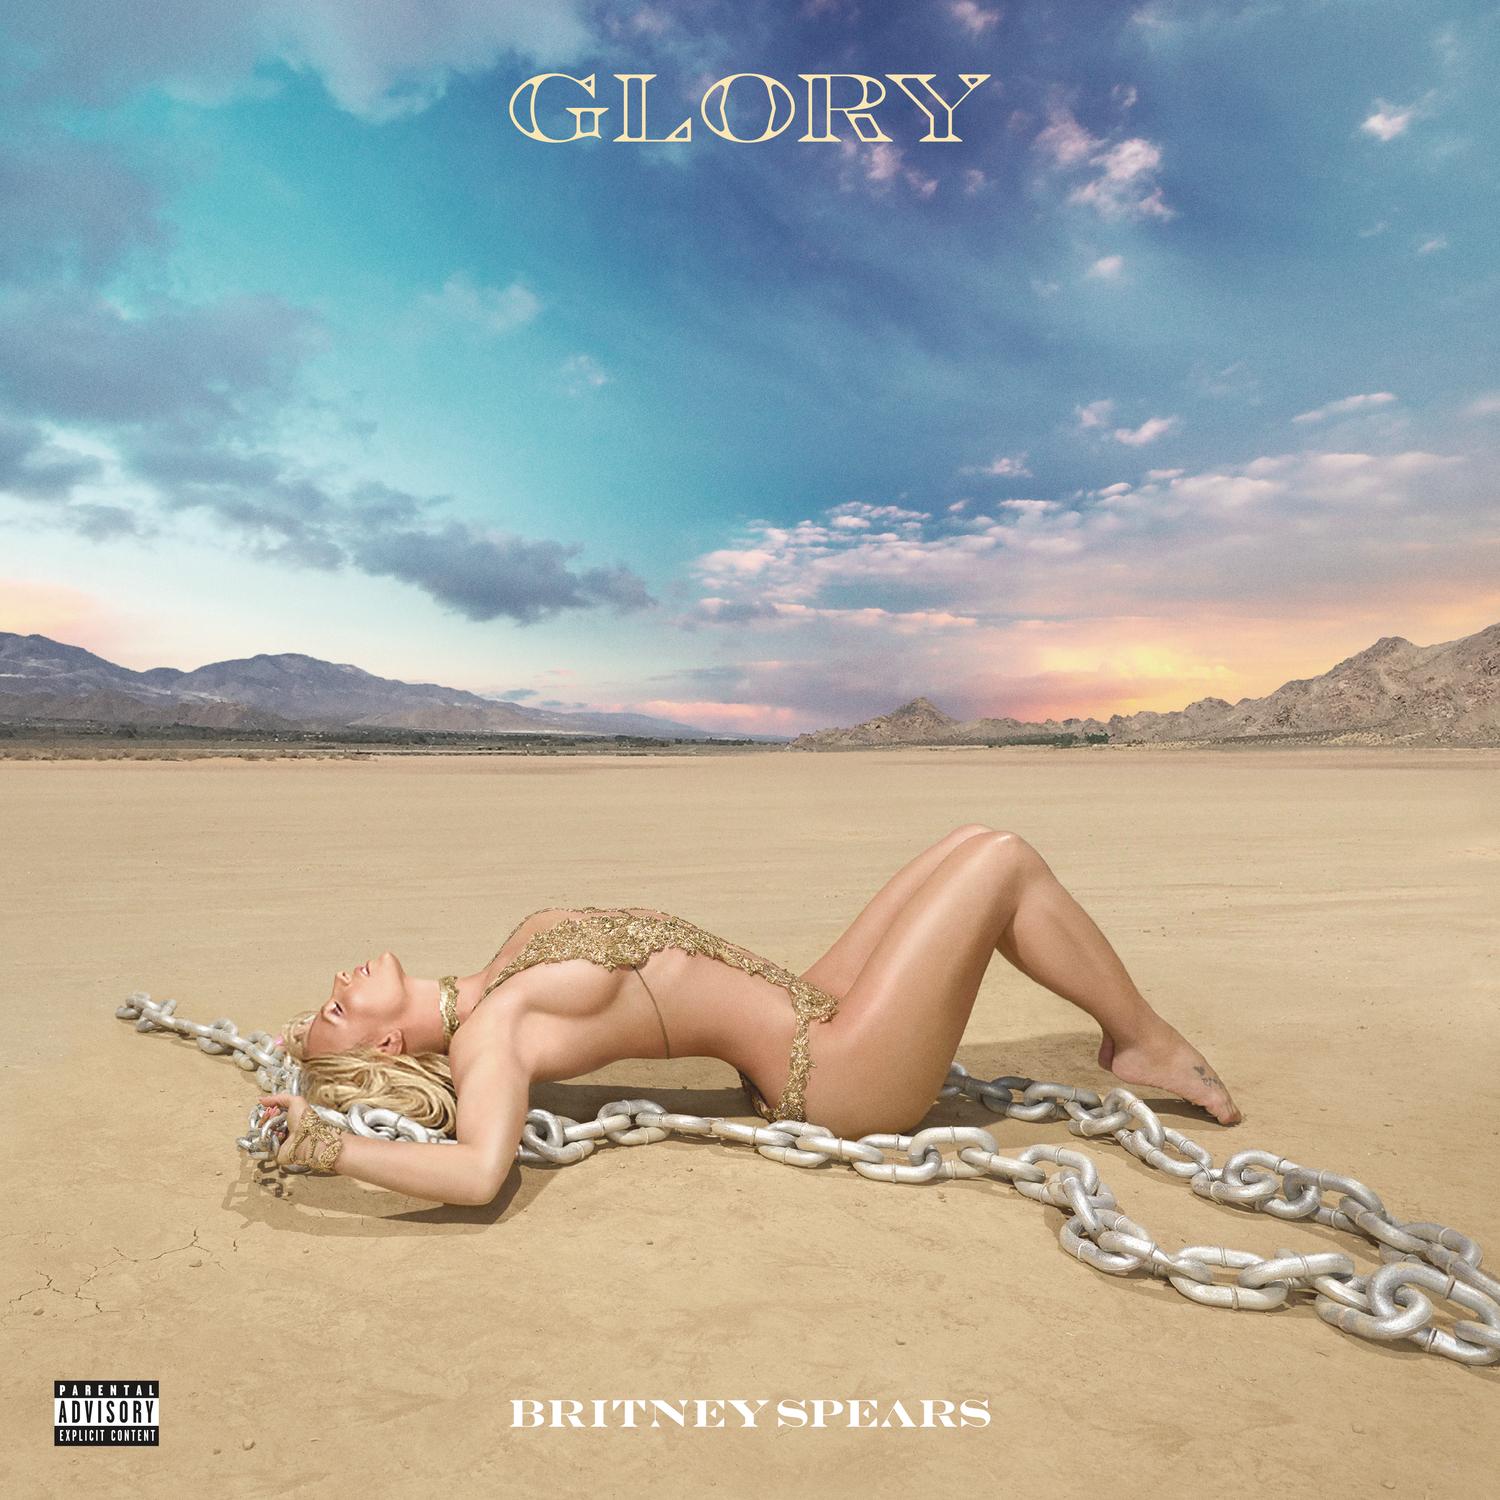 Britney Spears - Glory (Deluxe Version) - Photo 1/1